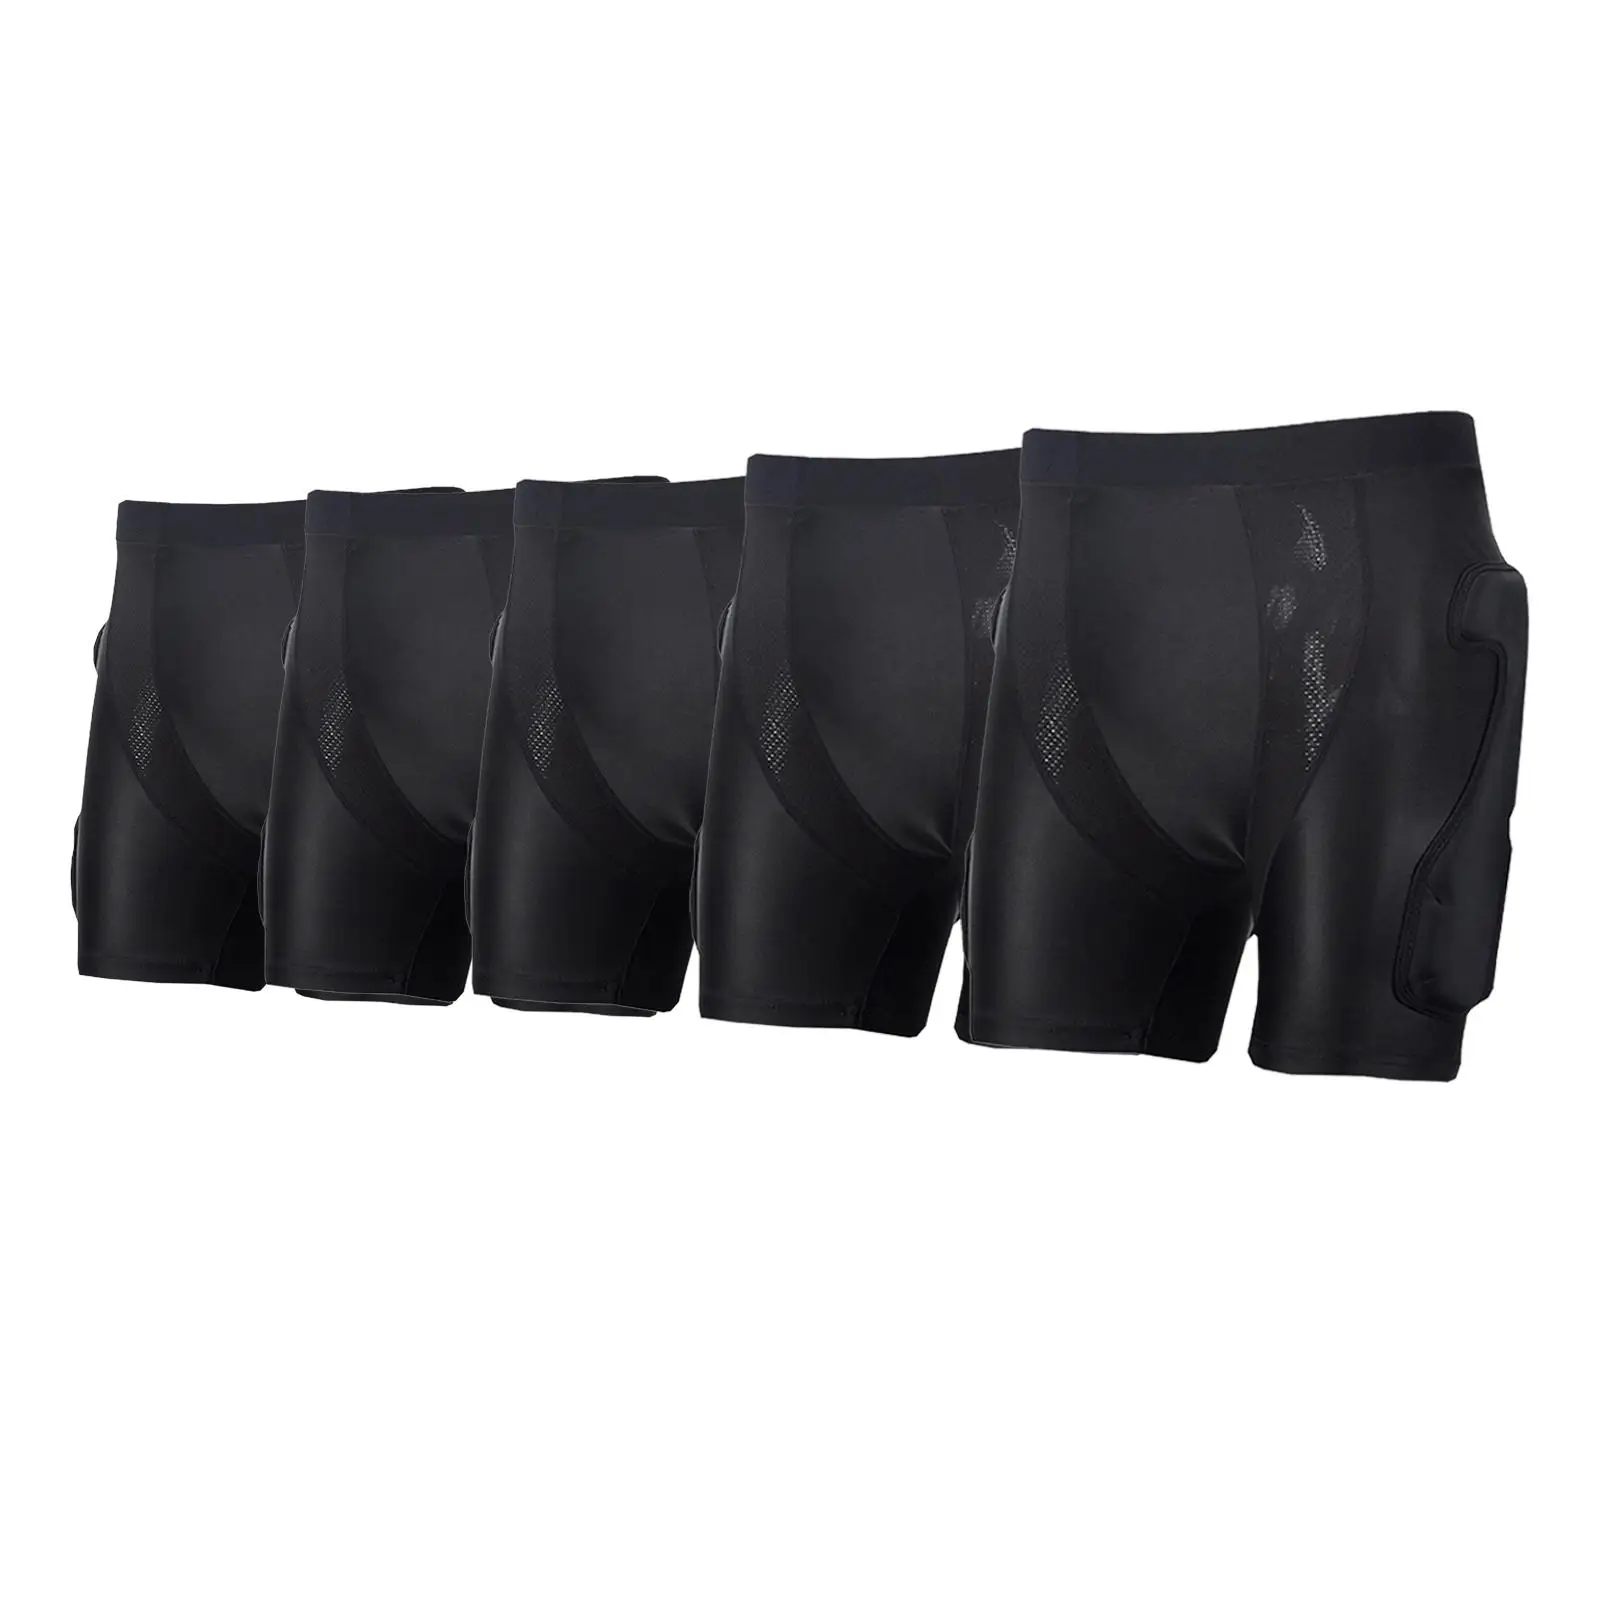 Padded Shorts Skid Hip Pad Multifunction 3D Impact Pad Pants for Riding Outdoor Sports Snowboarding Roller Skating Adults Teens